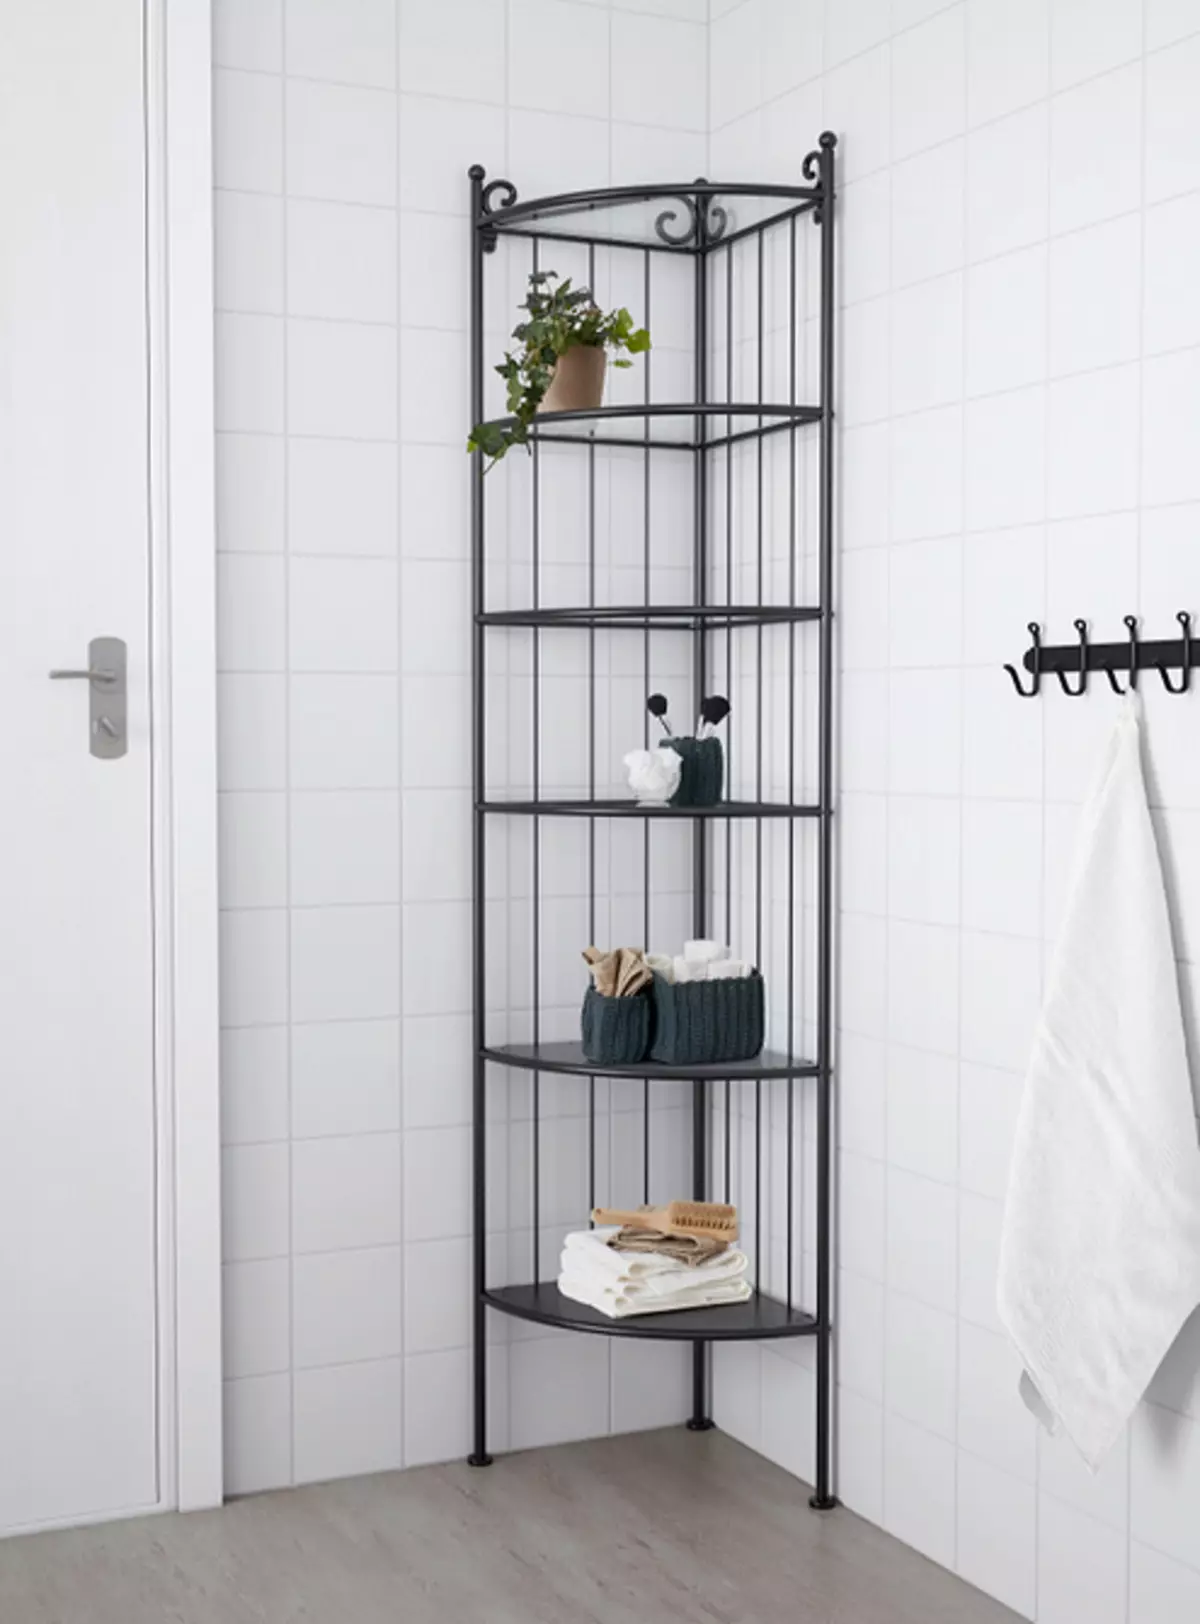 IKEA for a small bathroom: 6 items that you like 6586_30